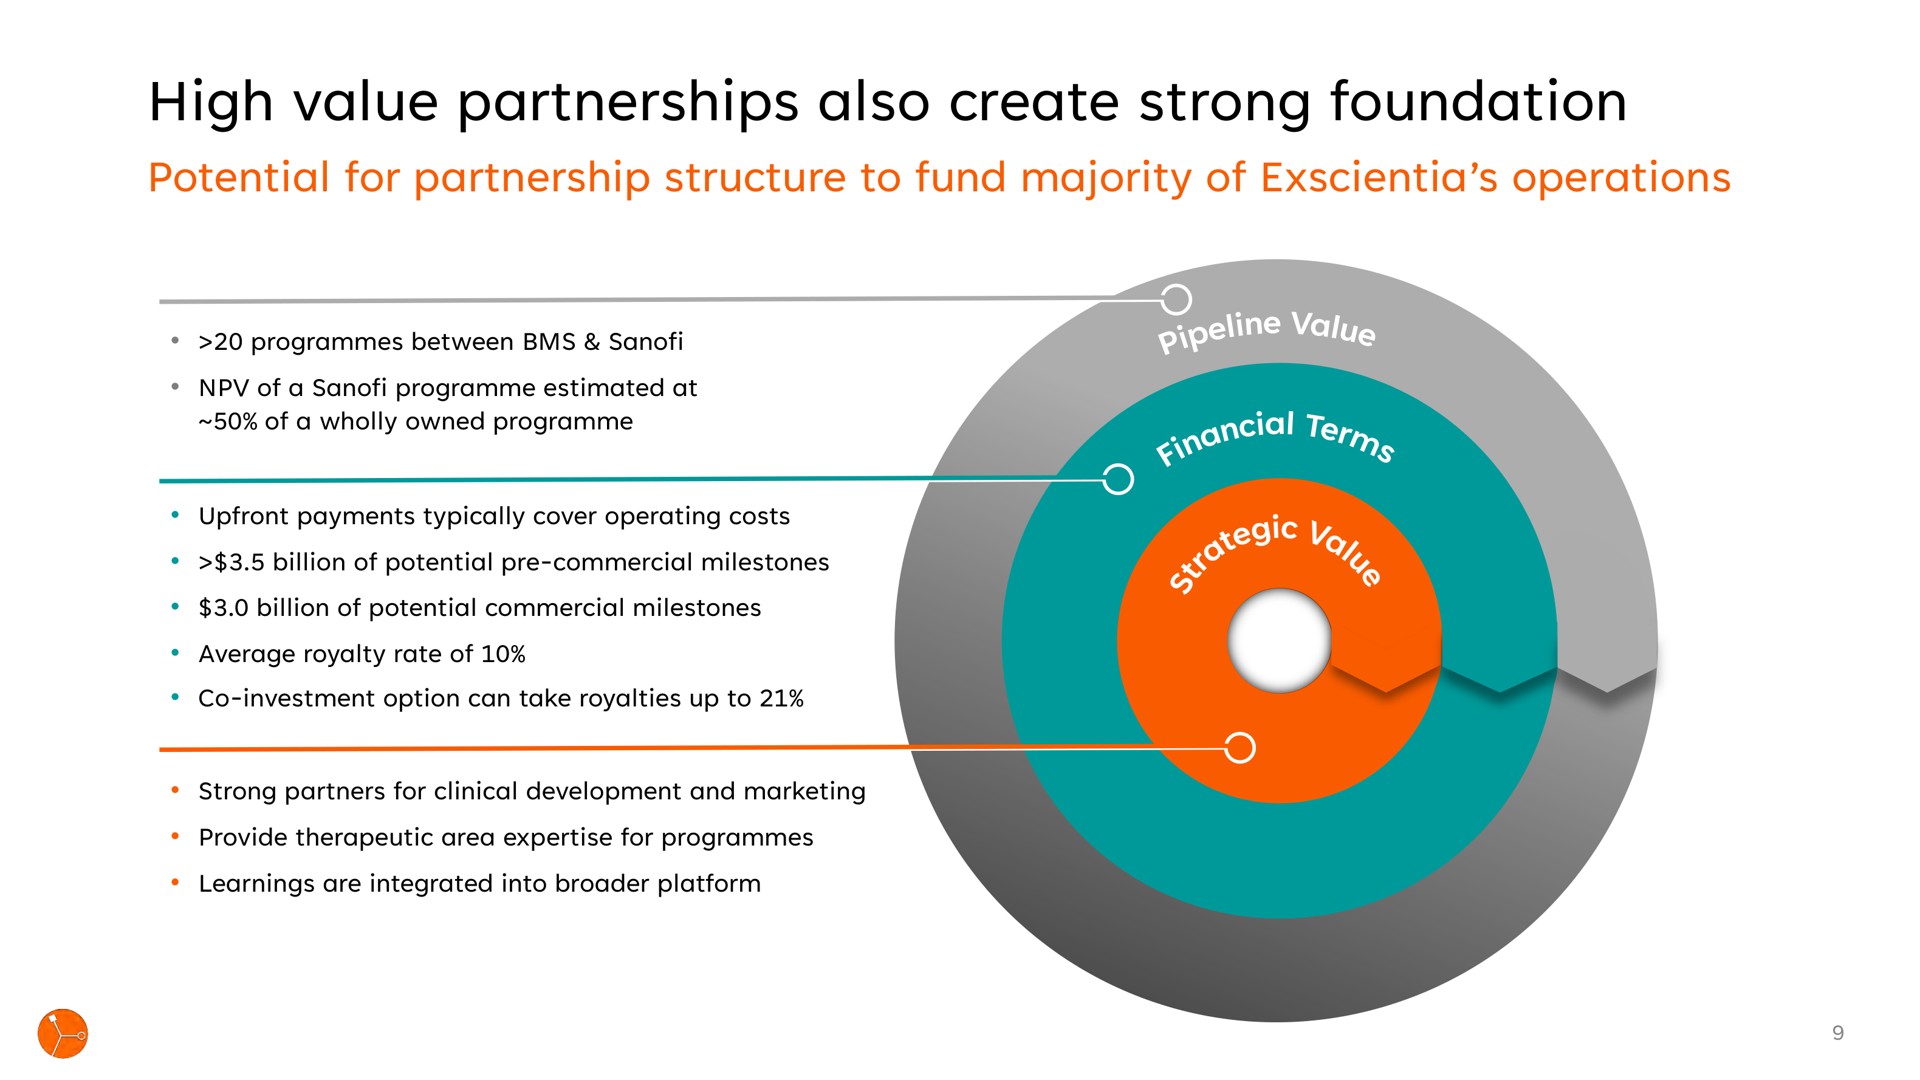 high value partnerships also create strong foundation | Exscientia